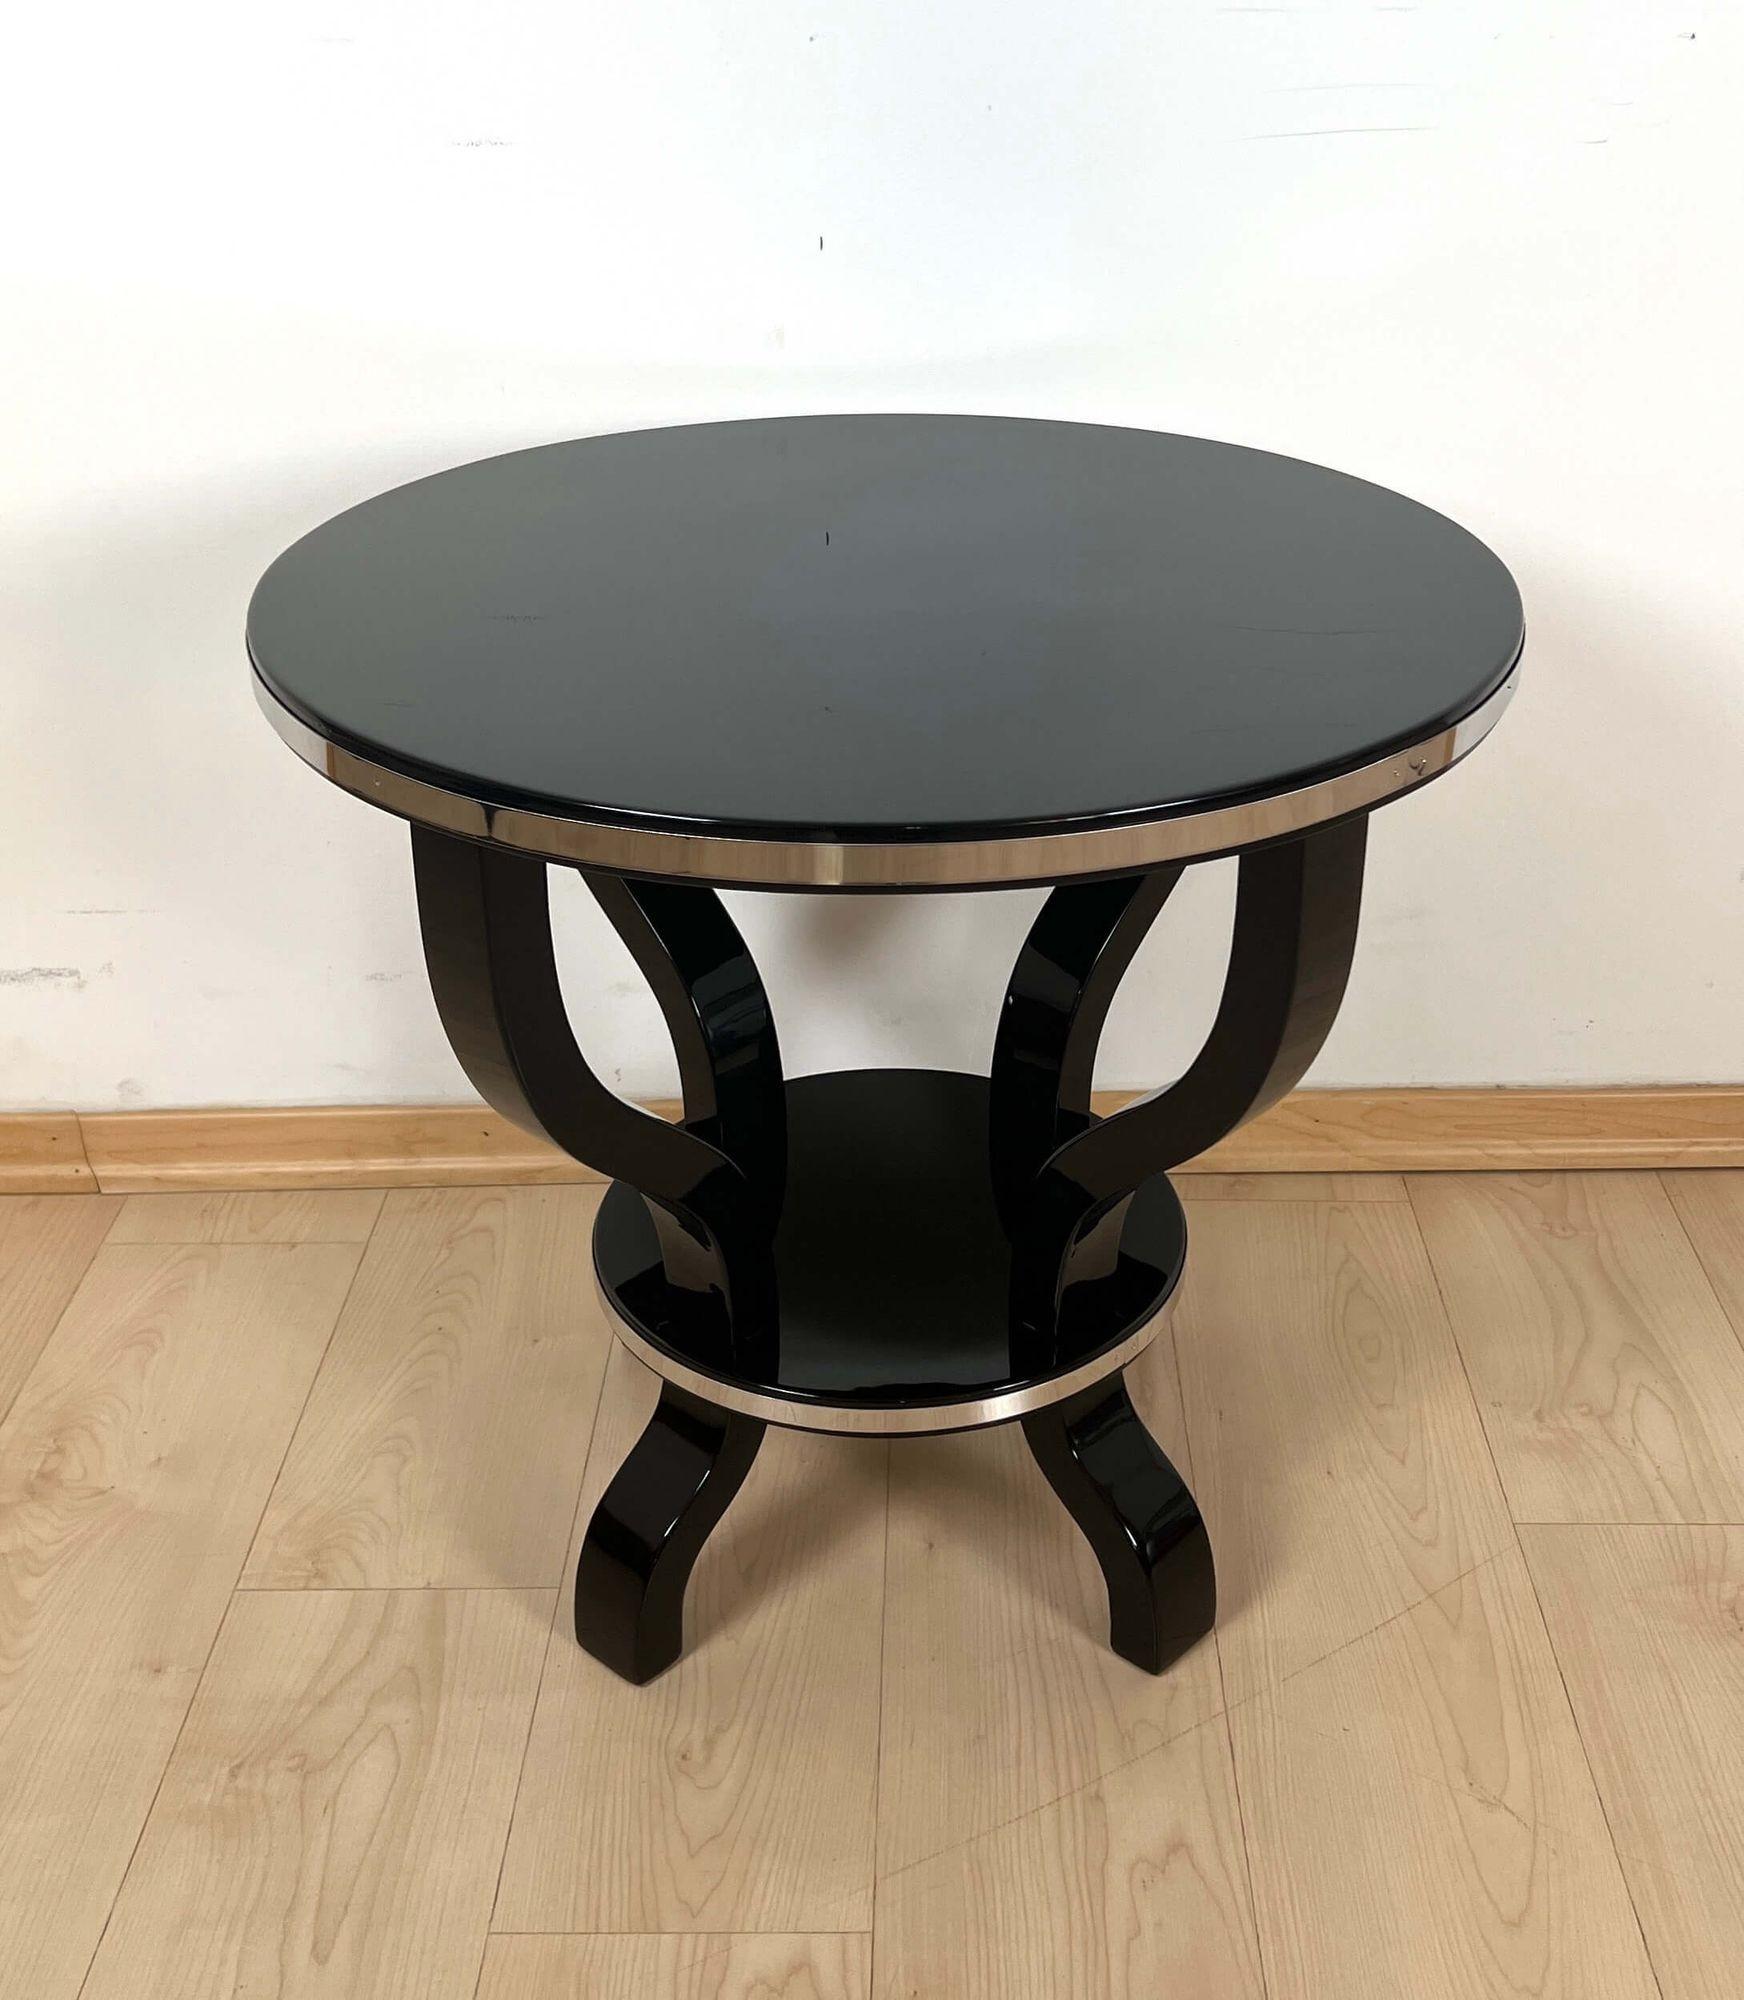 Lacquered Art Deco Gueridon or Round Side Table, Black Lacquer, Metal, France circa 193